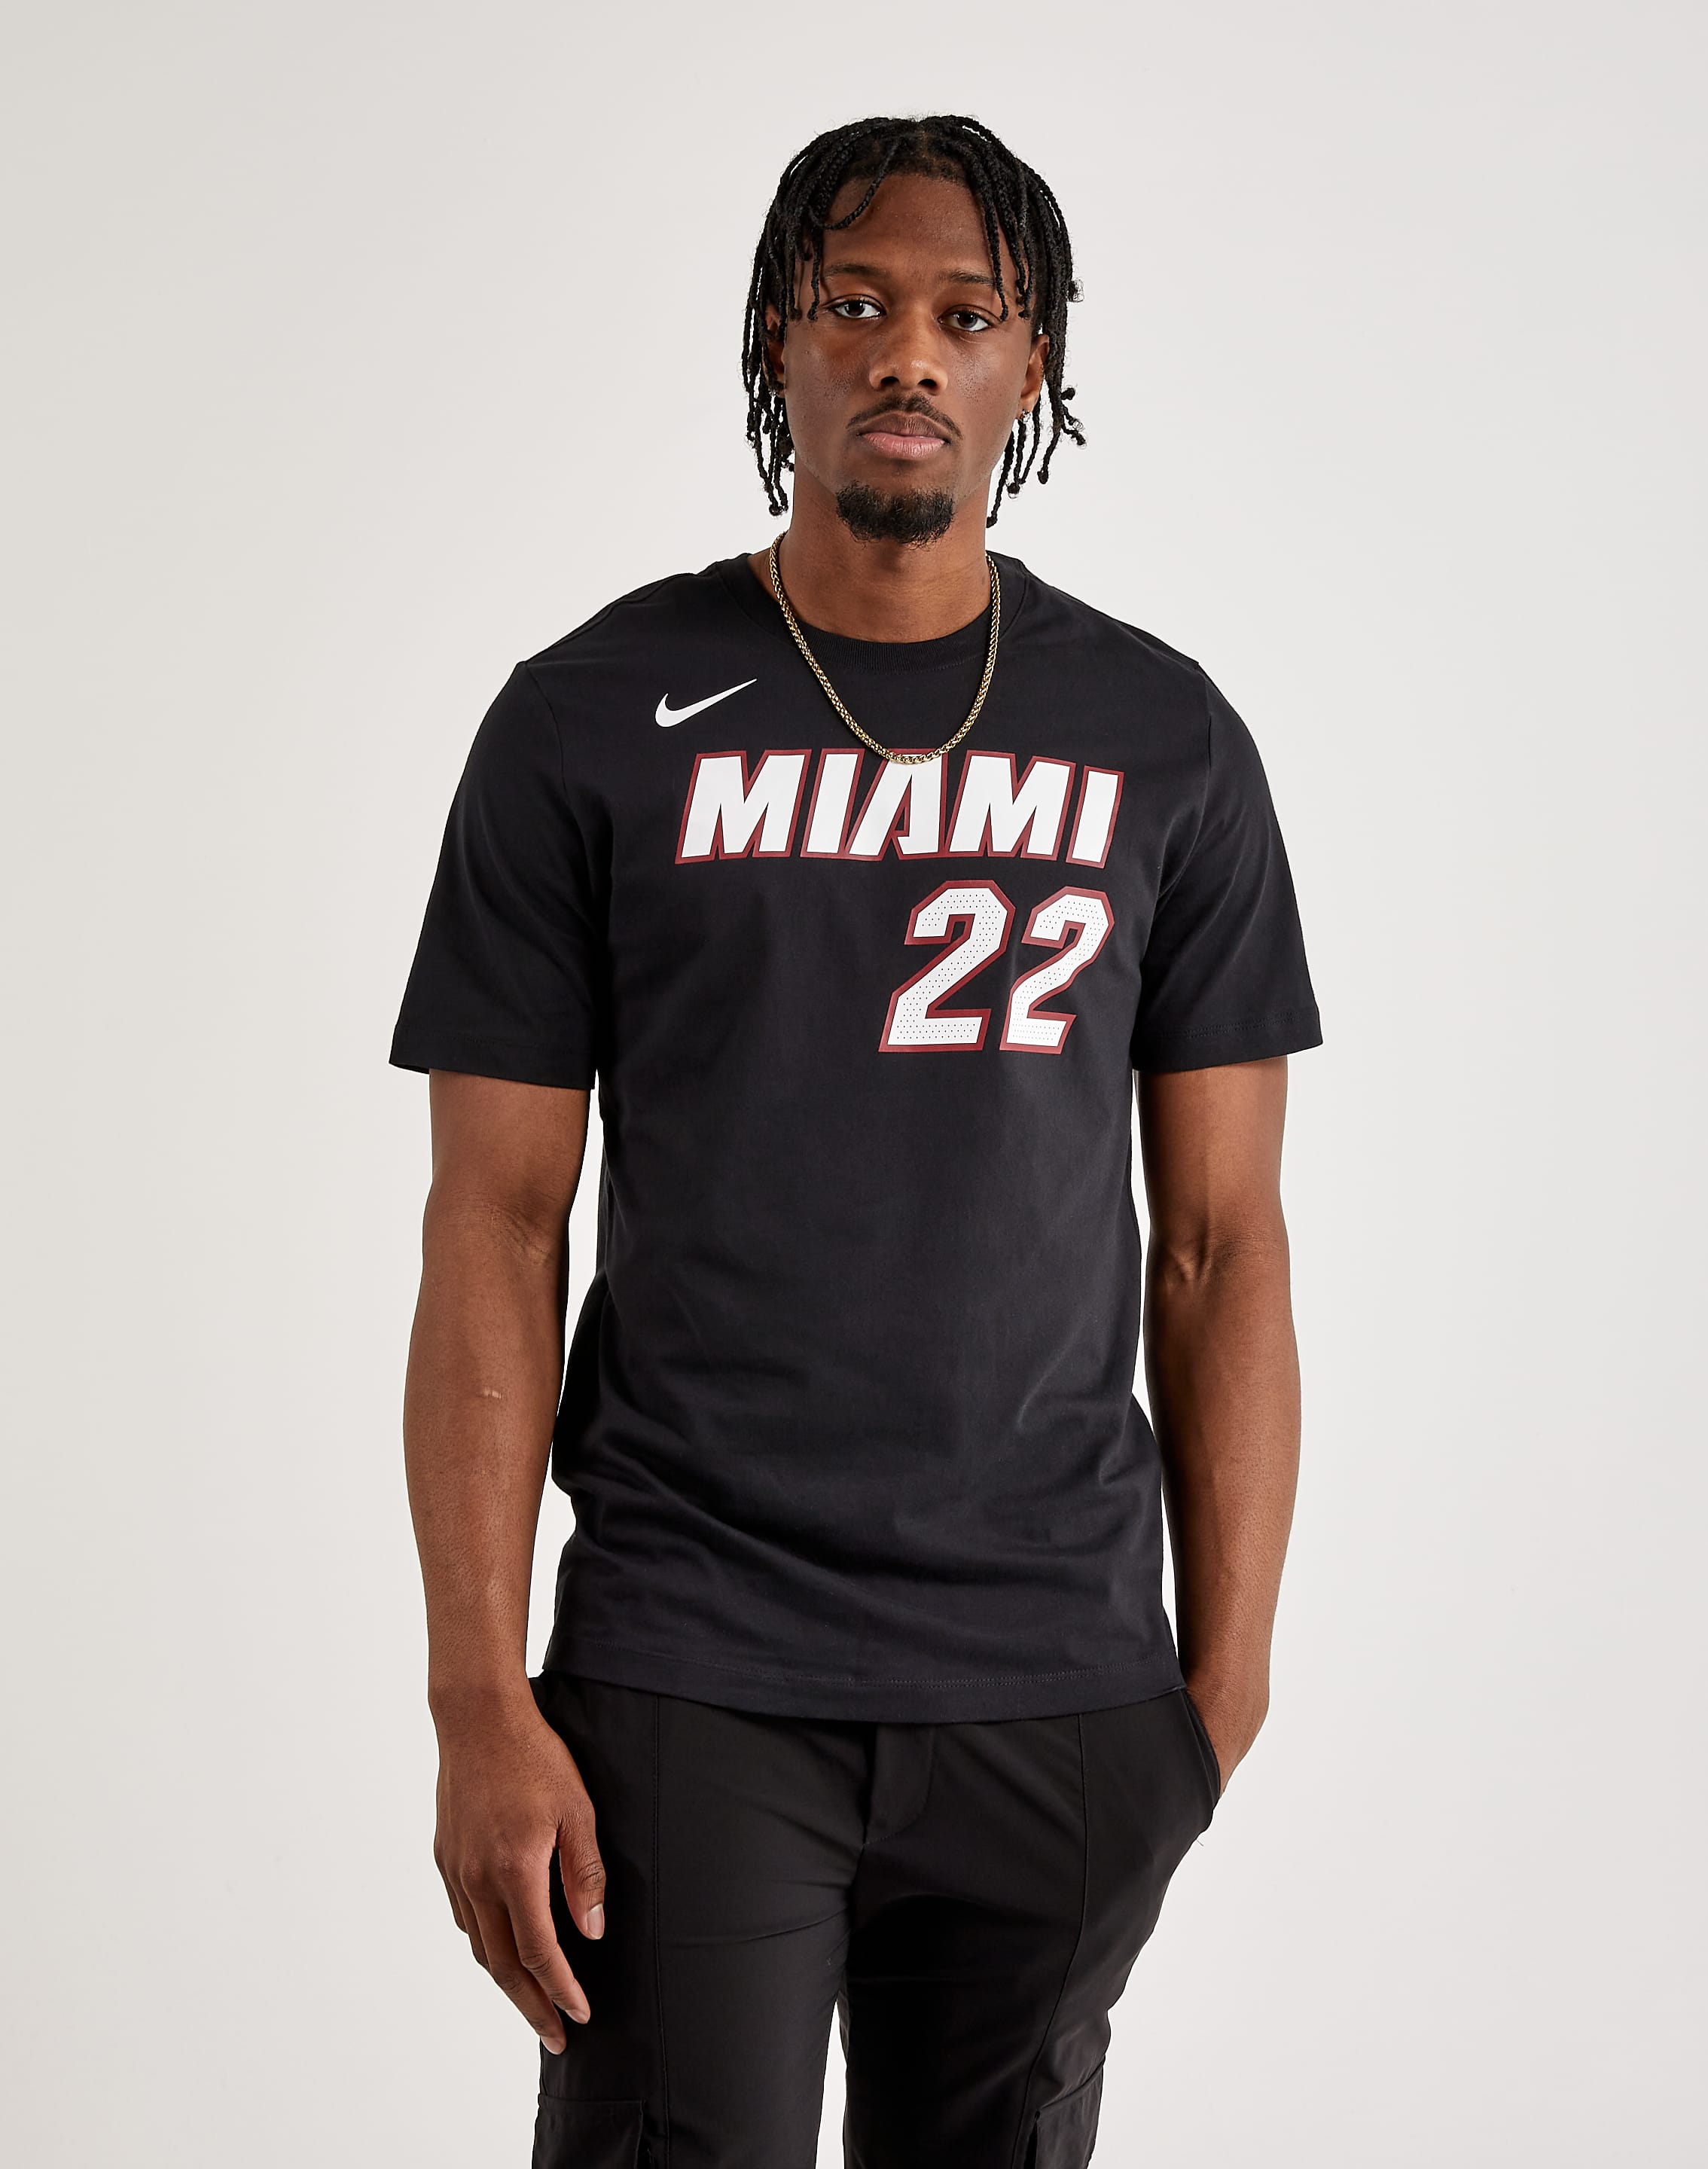 Statement Red Nike Jerseys – Tagged jimmy-butler – Miami HEAT Store